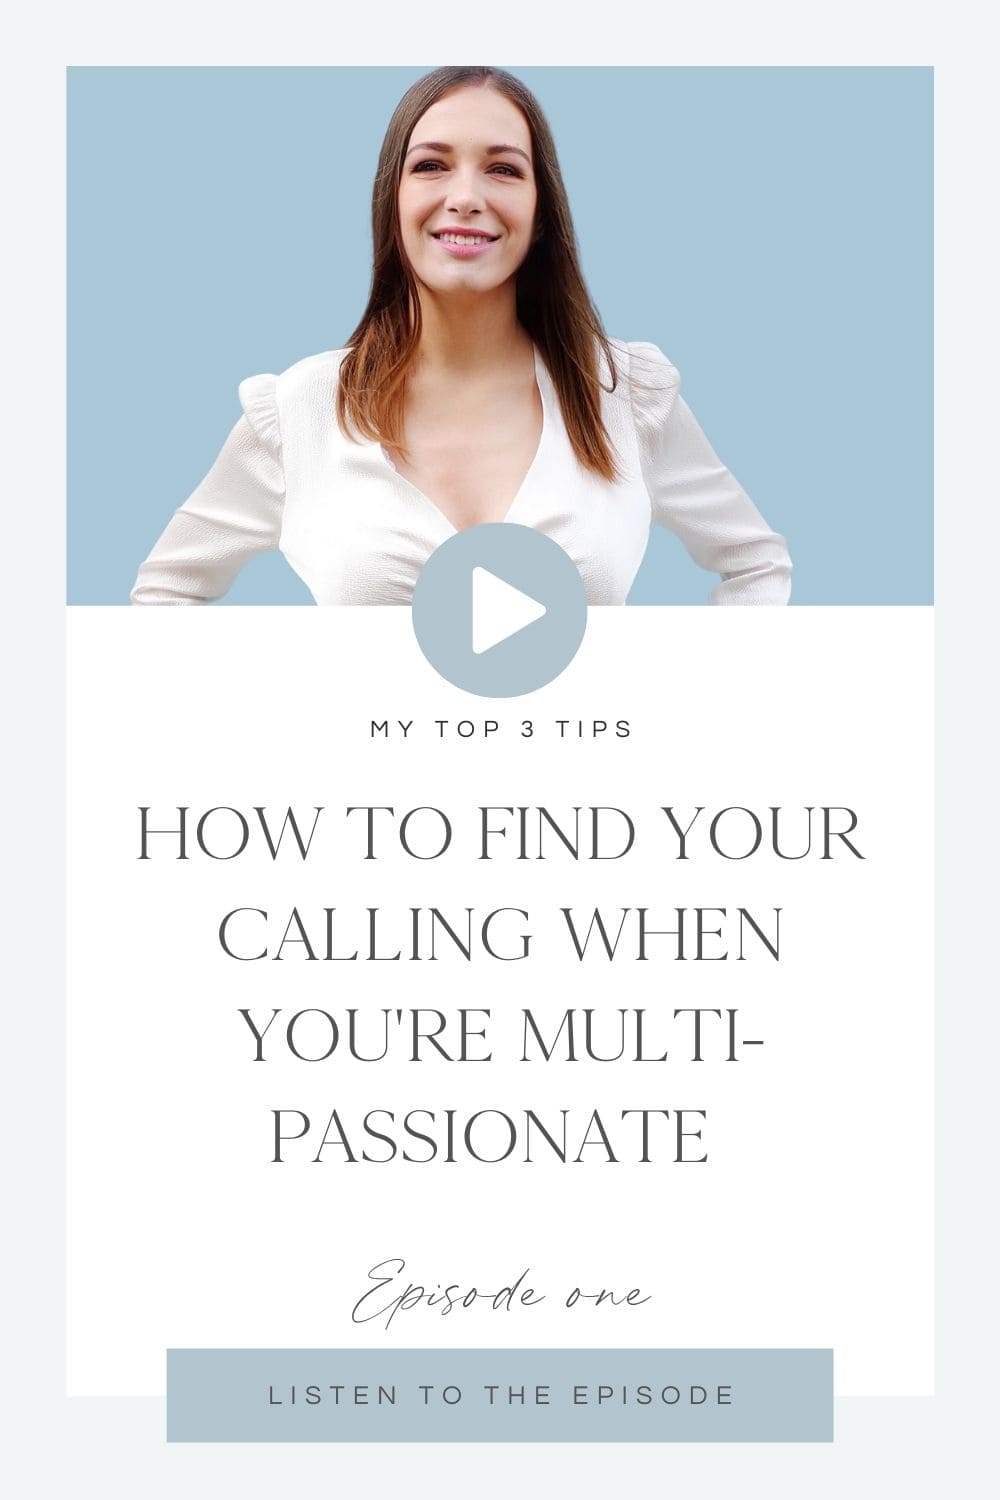 How to find your calling when you're multi-passionate podcast